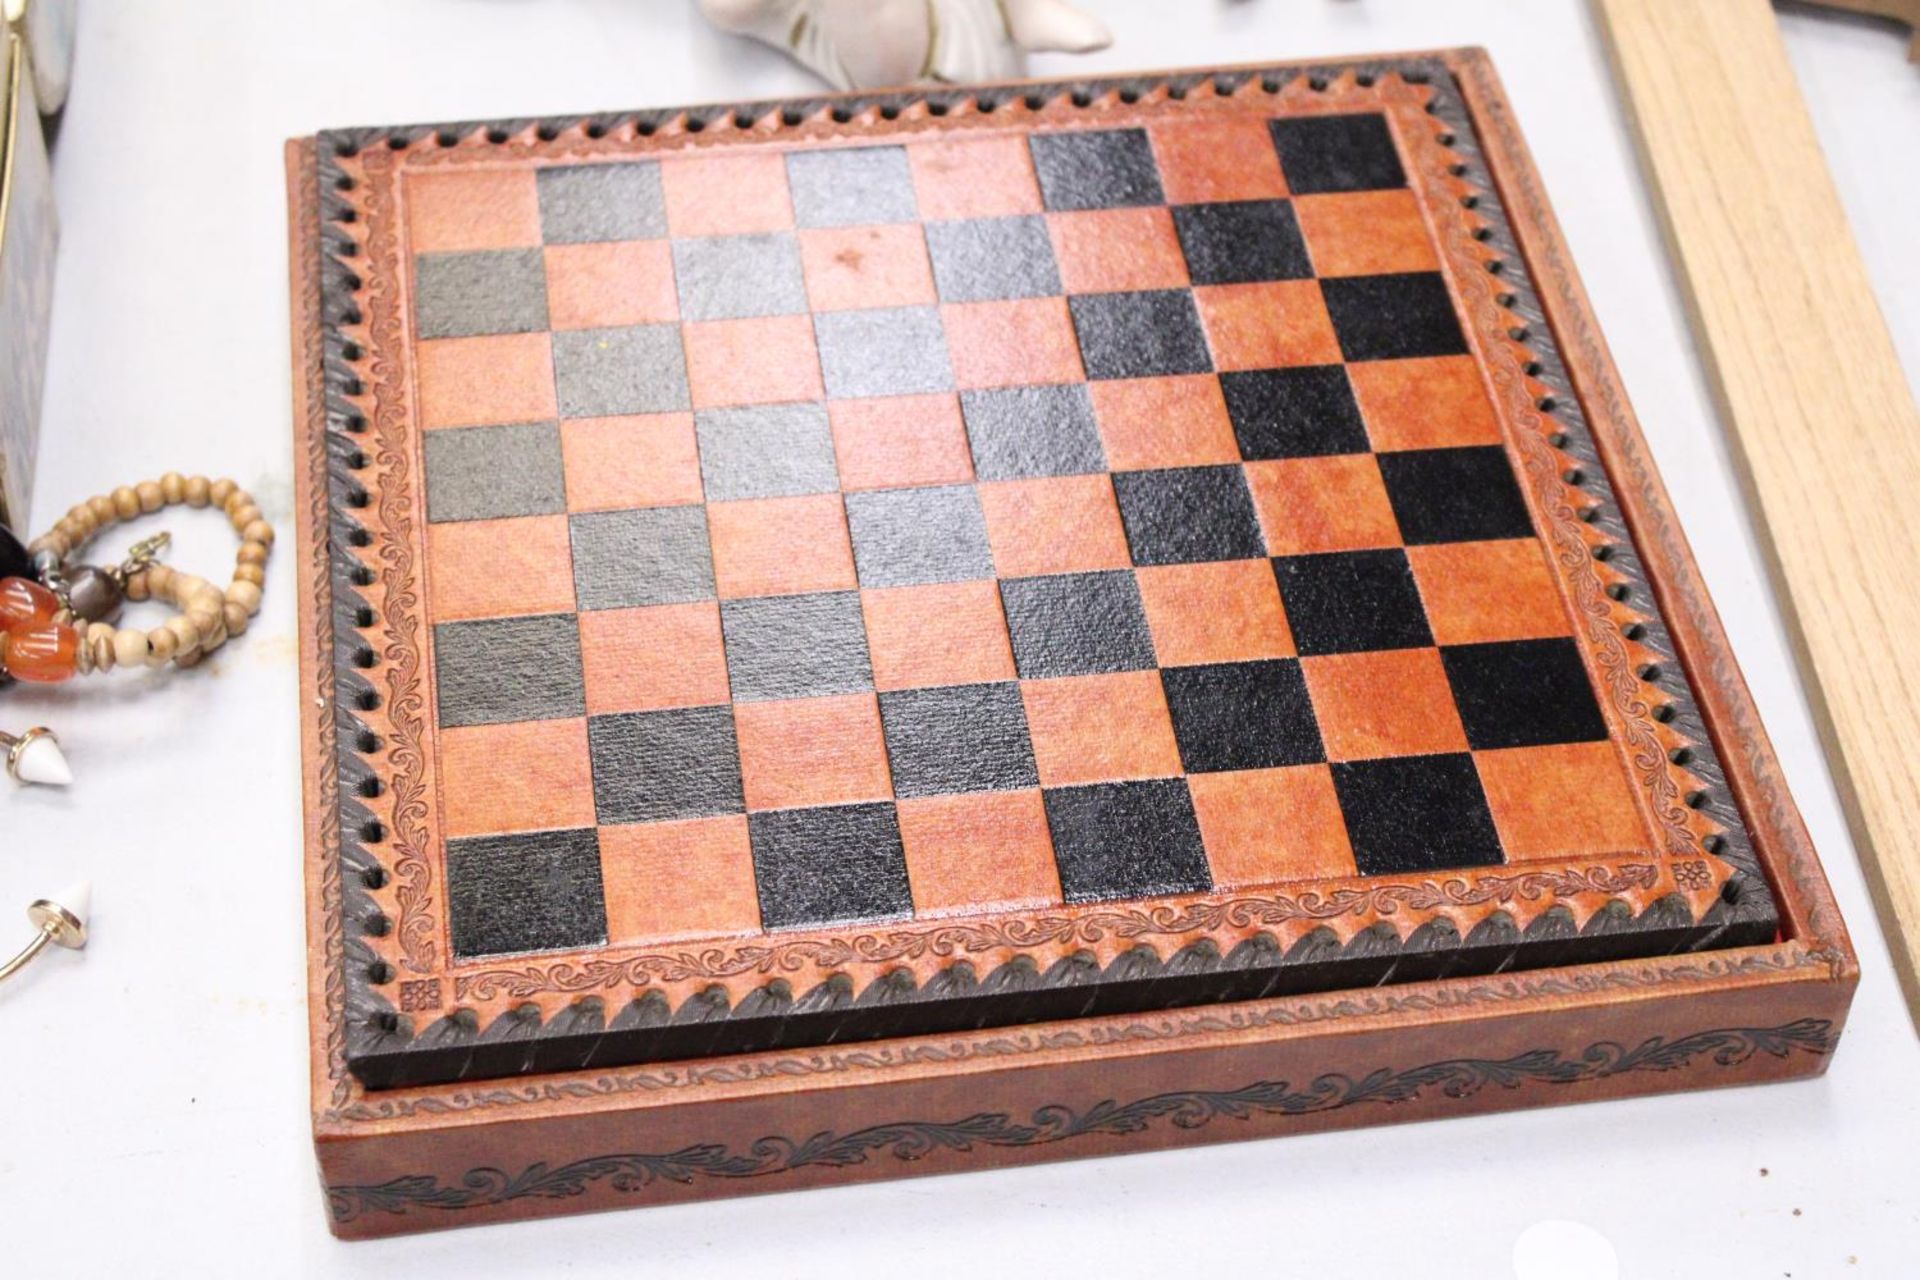 A LEATHERBOUND CHESS BOARD WITH METAL CHESS PIECES - COMPLETE